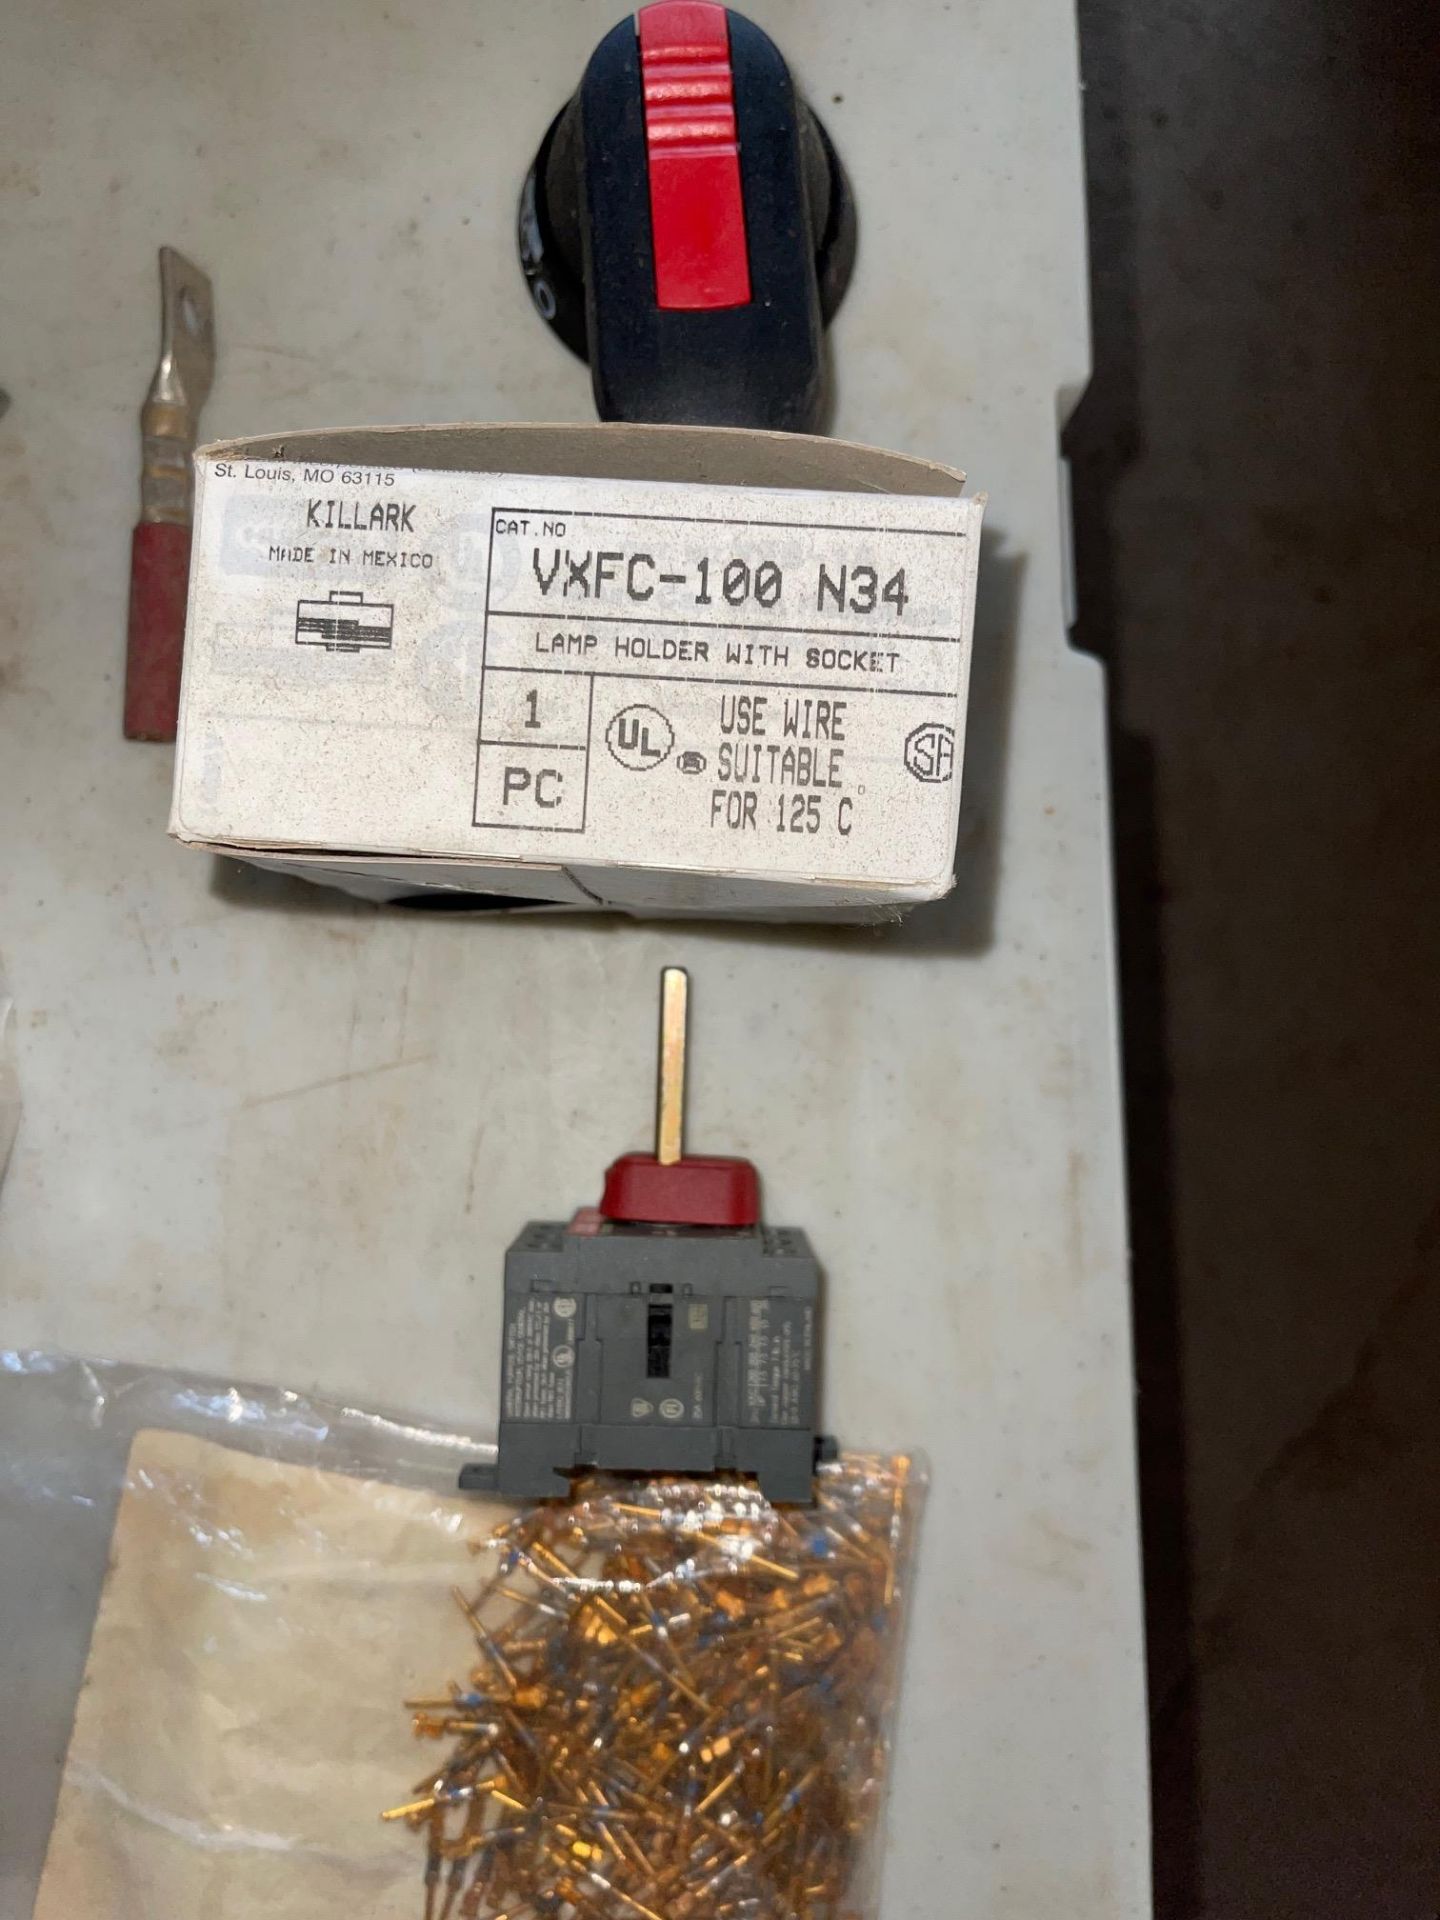 LOT/ ABB 20 AMP DISCONNECT SWITCHES, SOLENOID END WIRE CAPS, AB-855T TOWER LAMP AND PARTS, MERLIN - Image 2 of 3